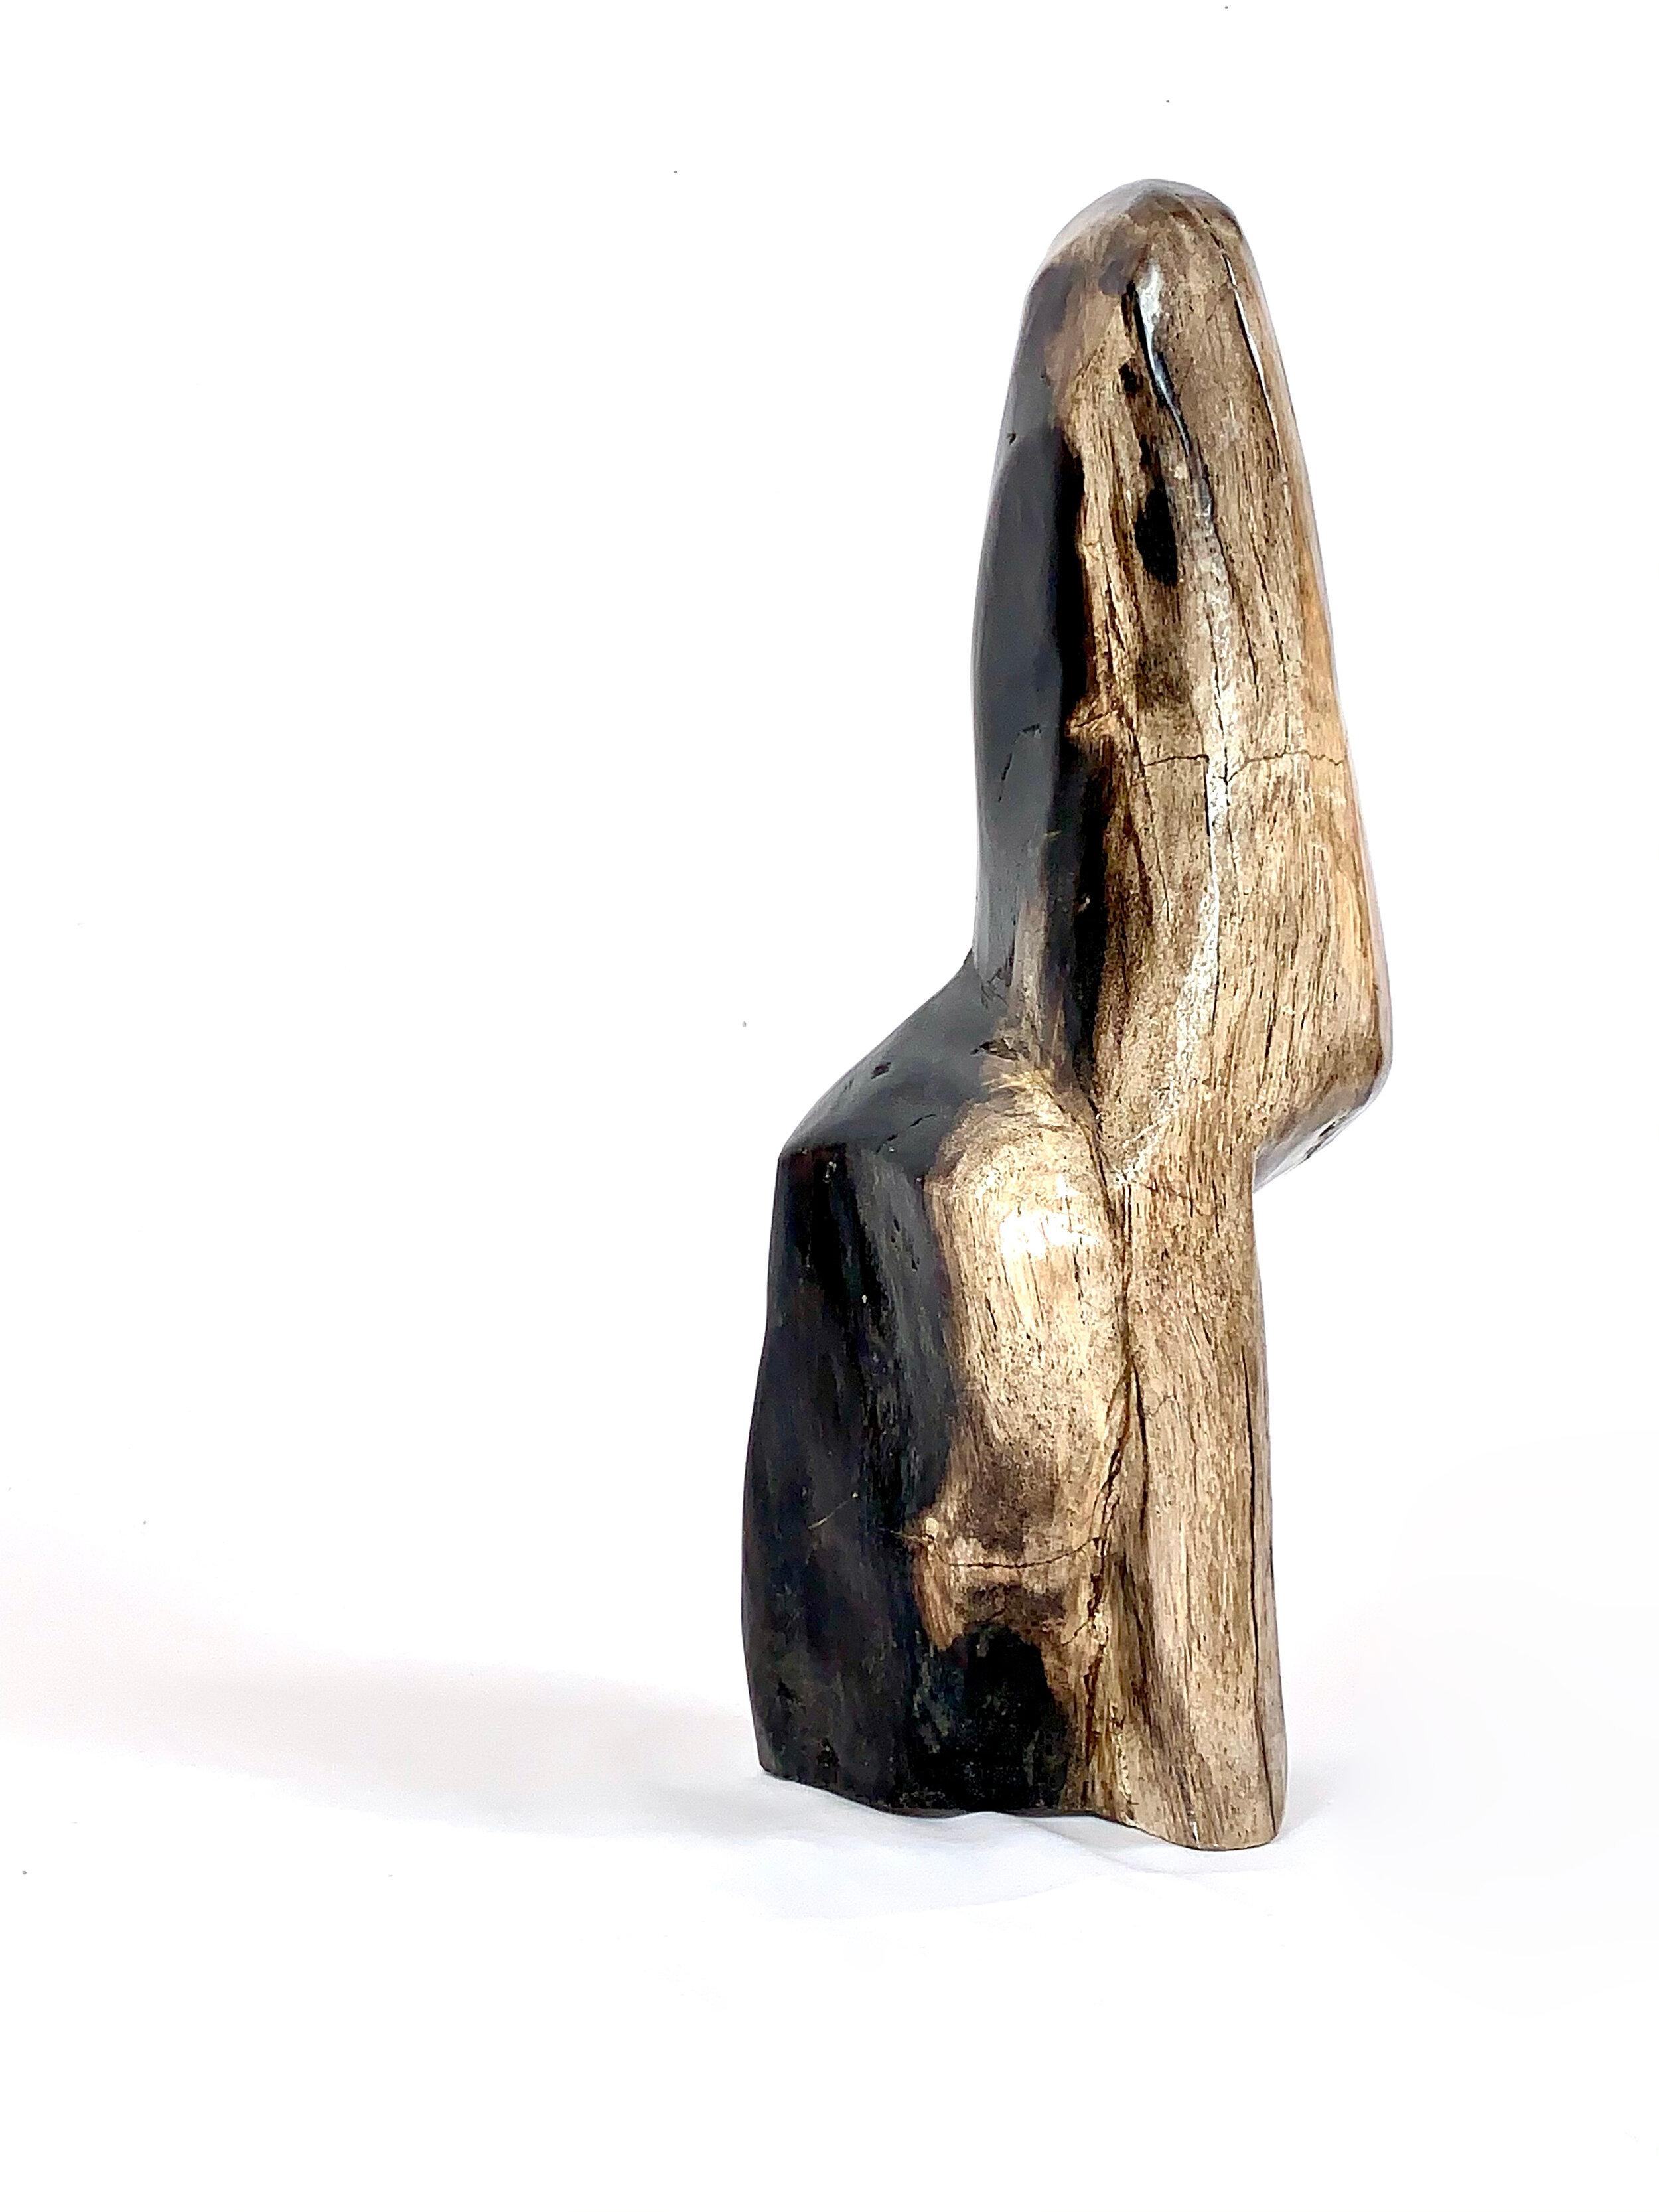 Petrified wood sculpture from Indonesia. Circa 250 Million Years Old

Natural History. From rare dinosaur skulls and Stone Age tools to the world’s earliest animals that date back millions of years, the Extraordinary Objects collection of natural